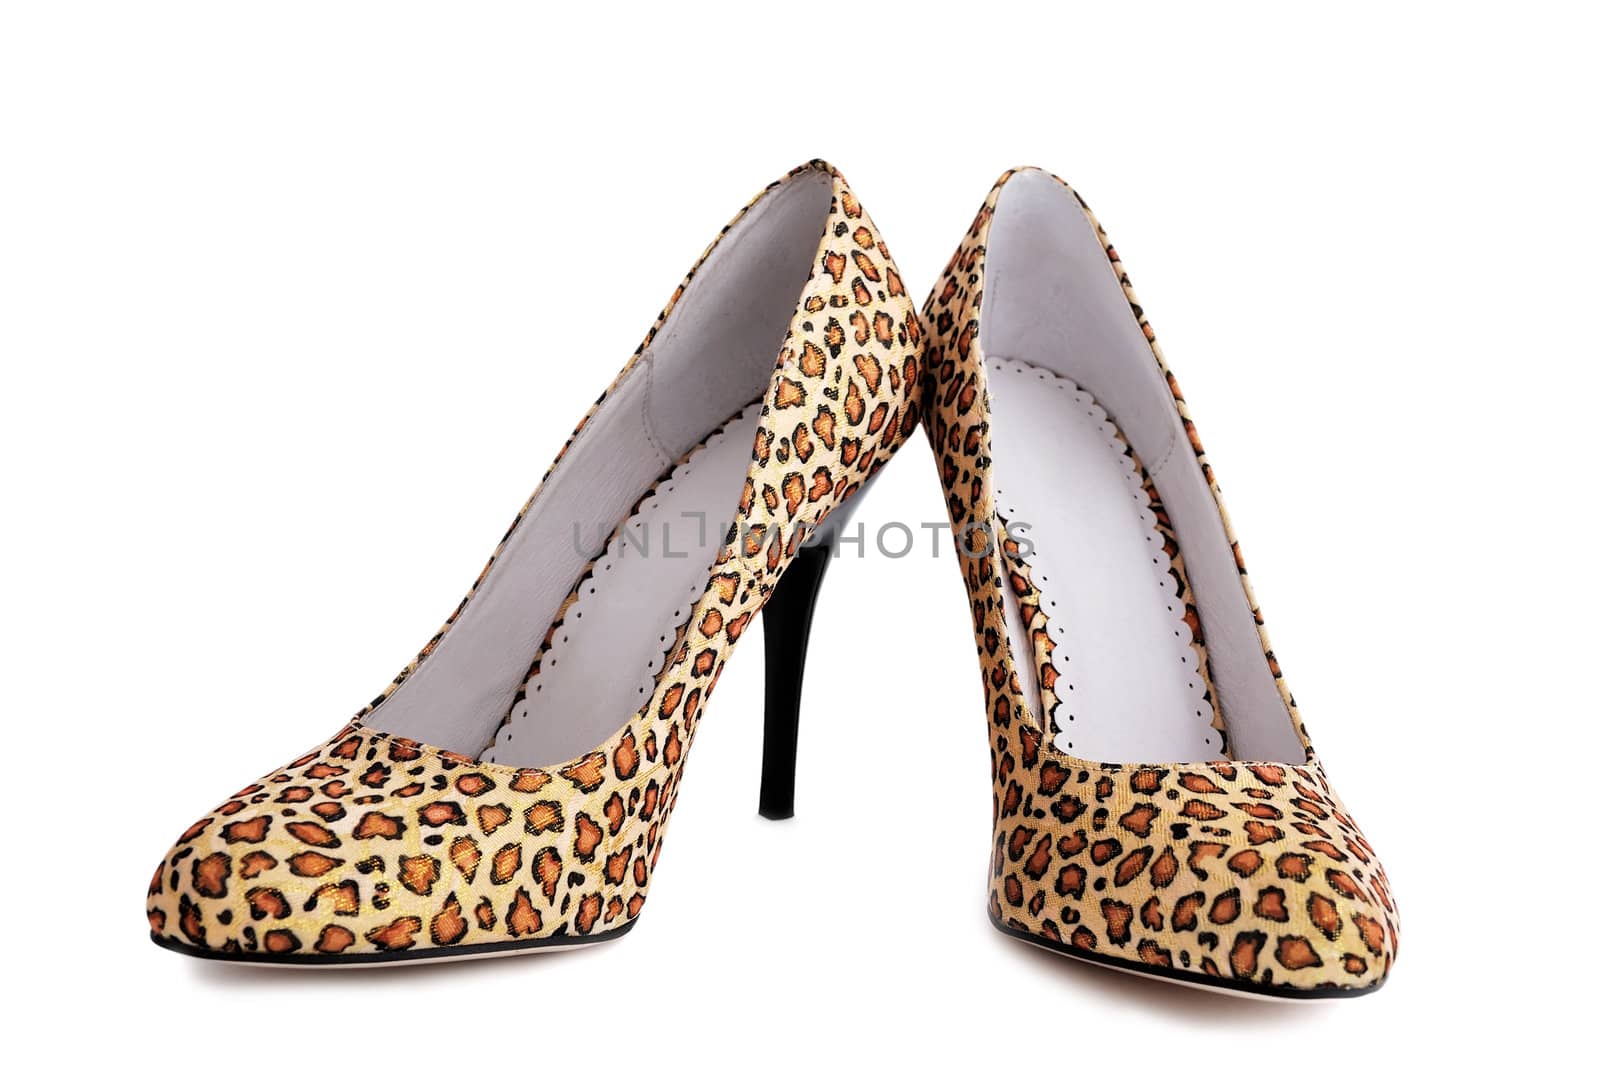 leopard shoes by vetkit